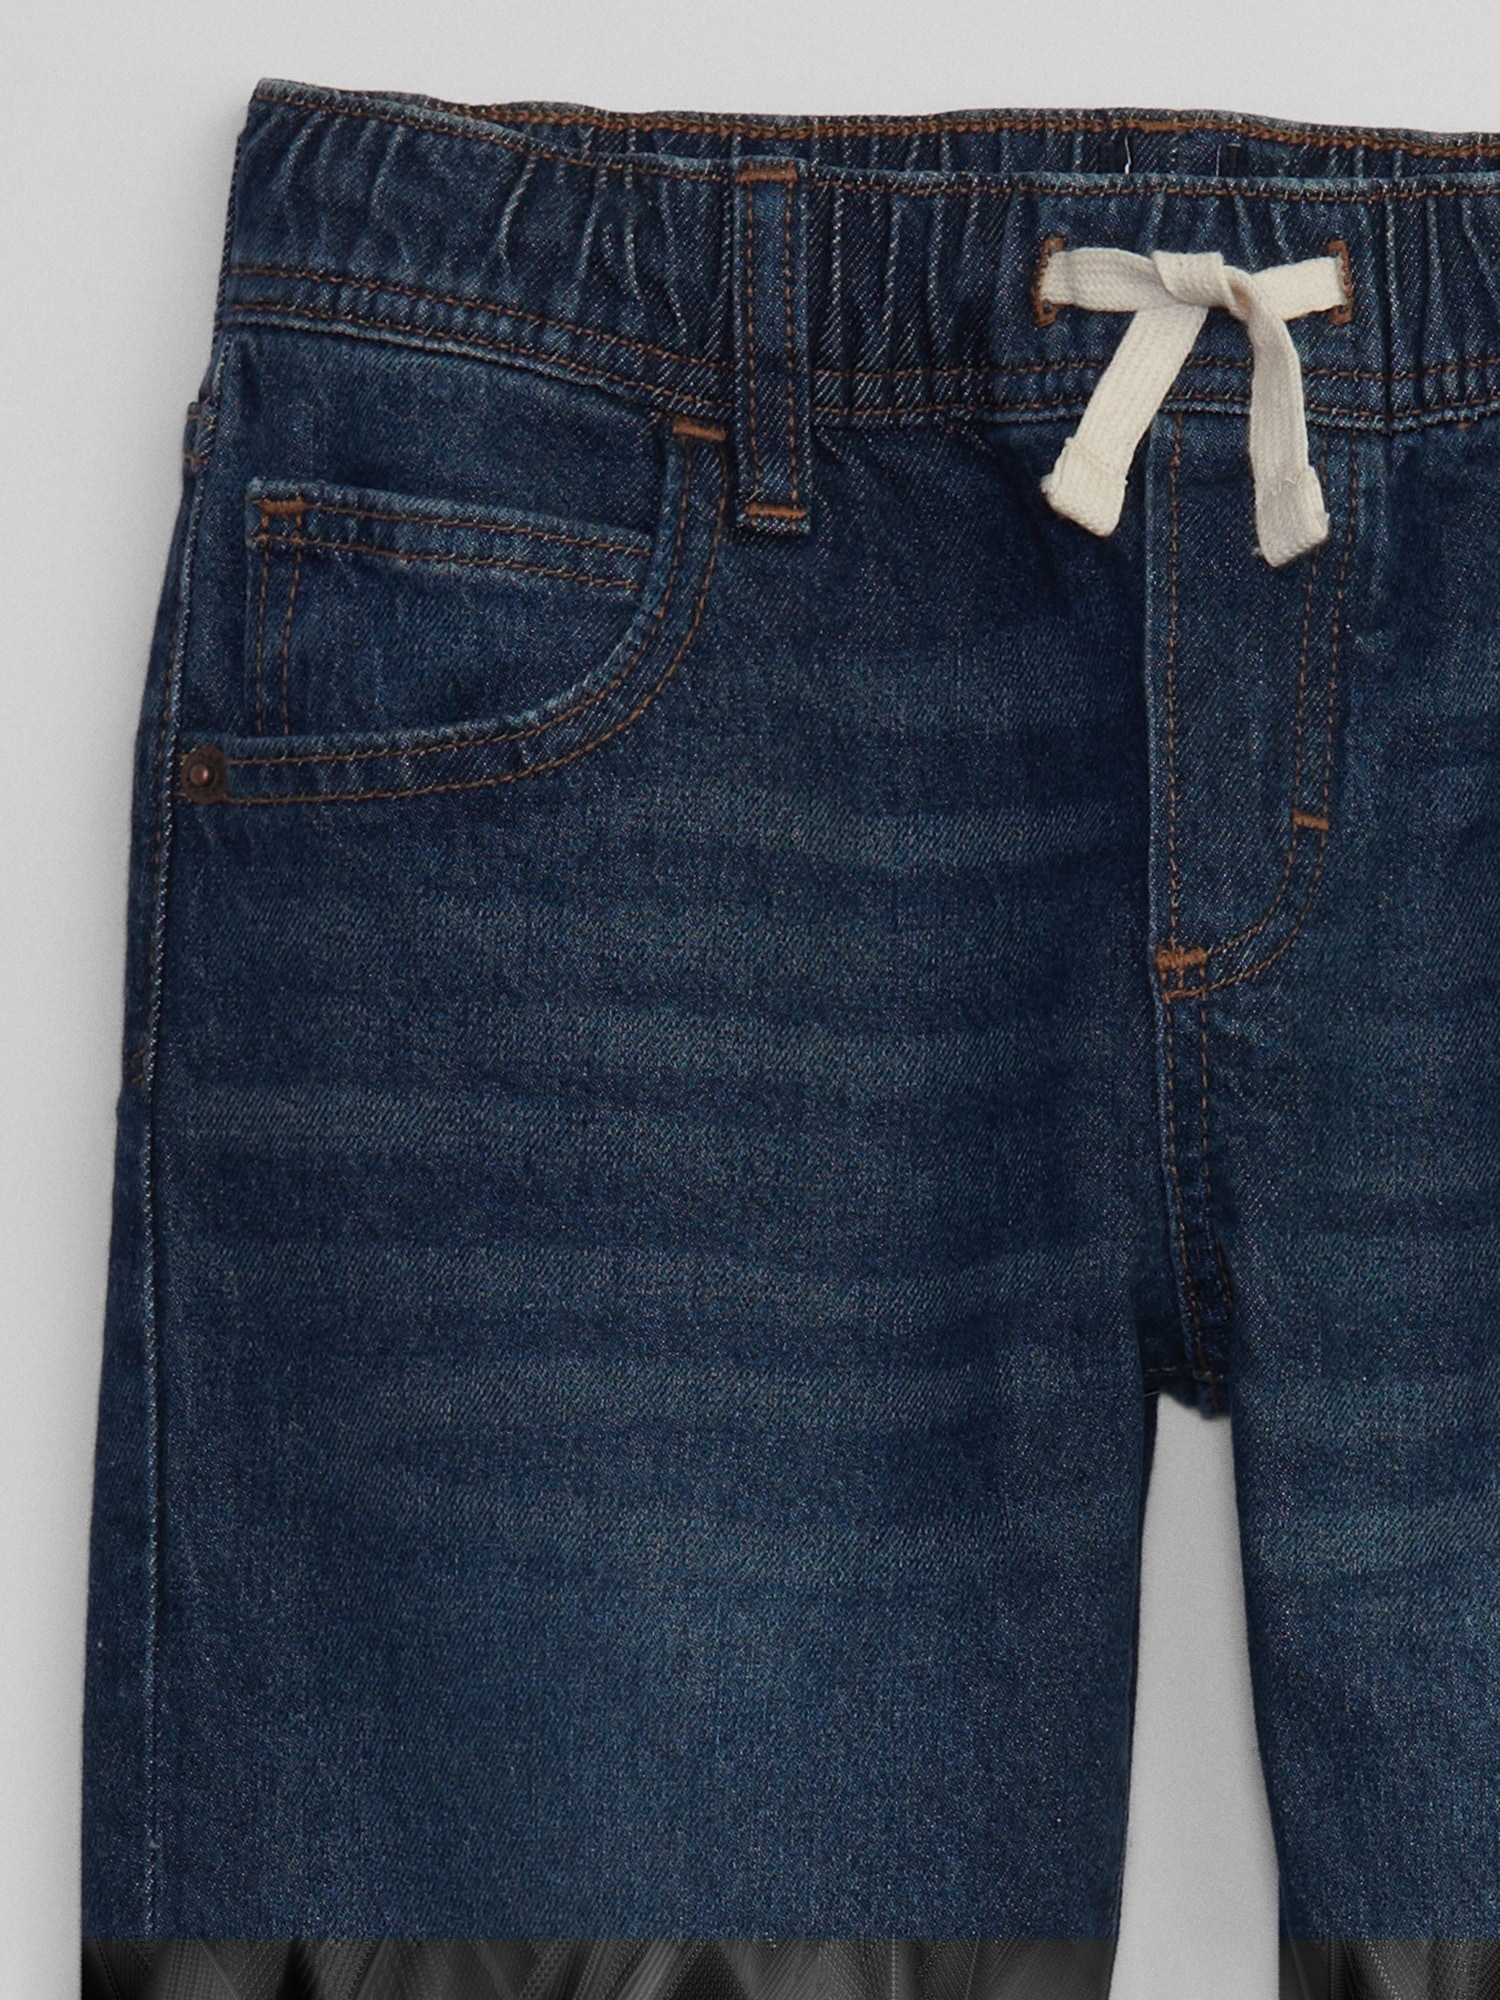 Kids Slim Pull-On Jeans with Washwell | Gap Factory